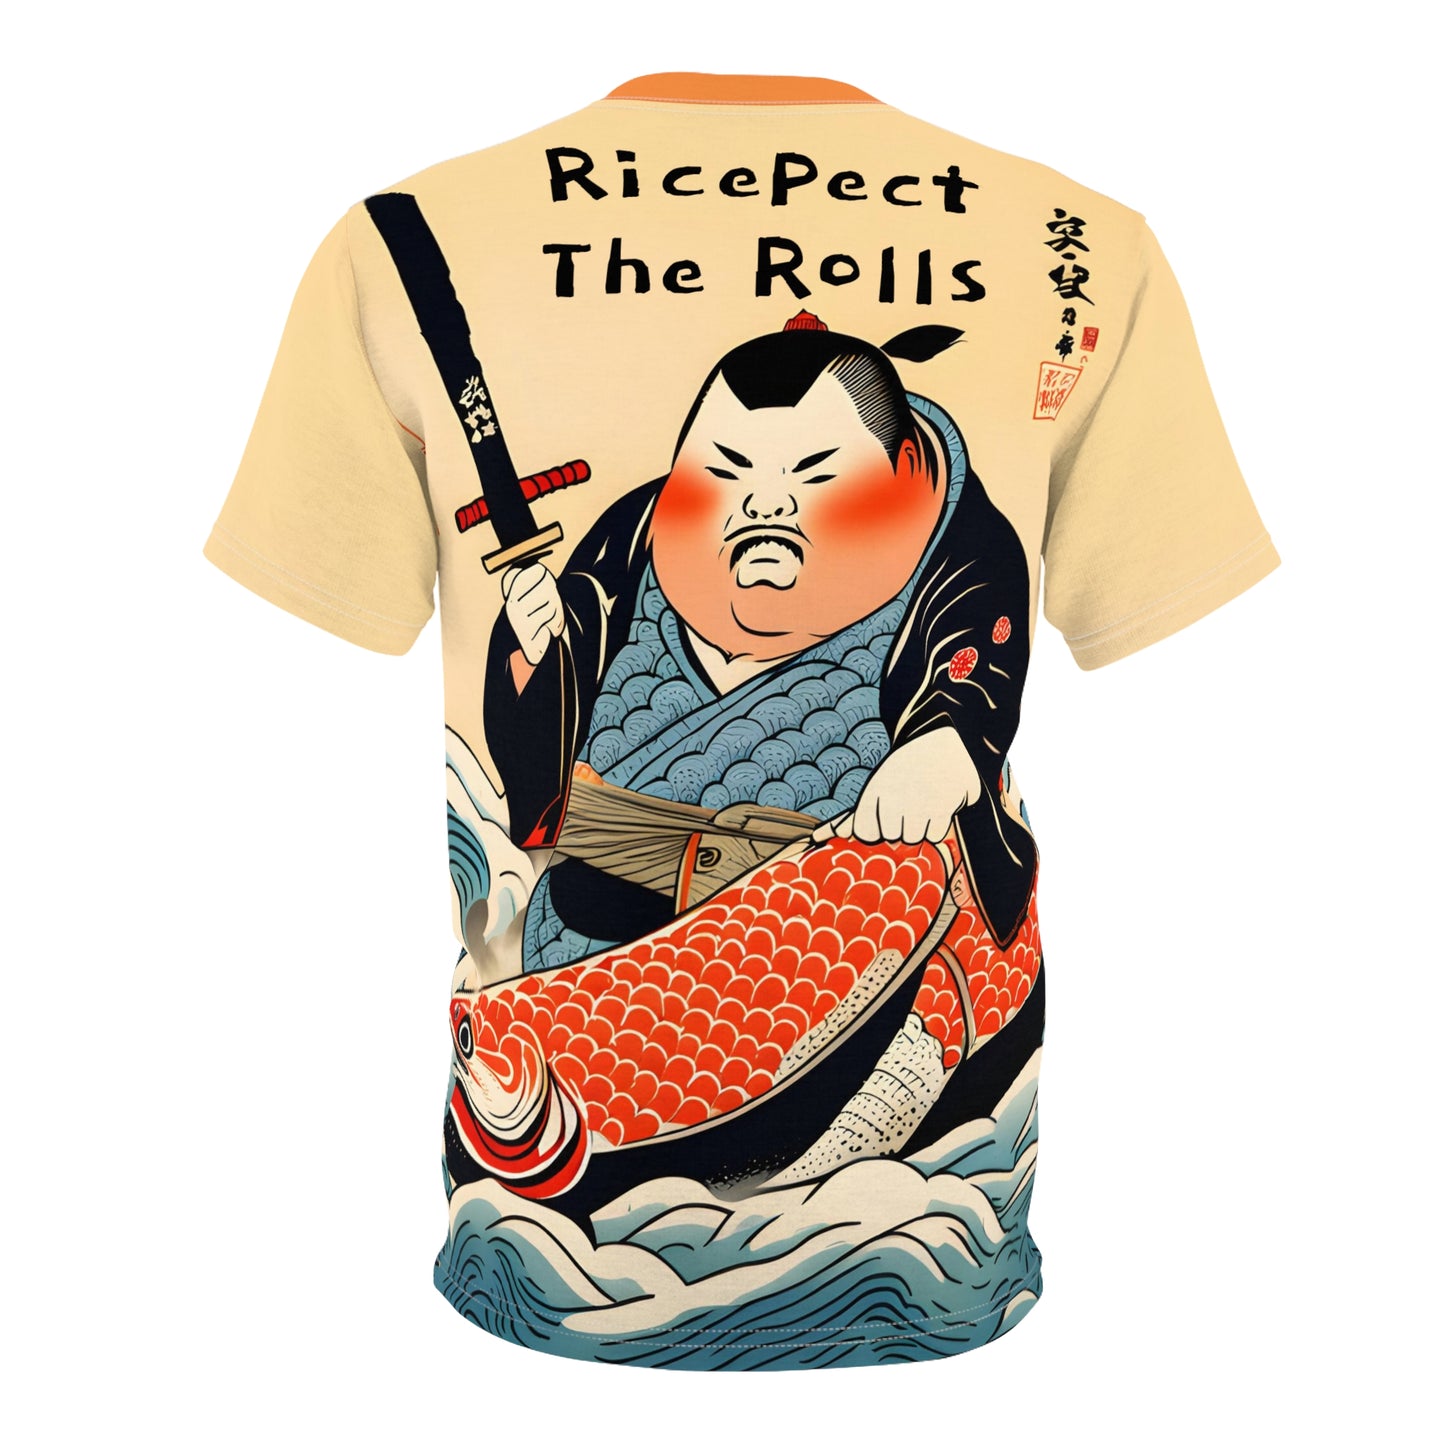 Ricepect The Rolls